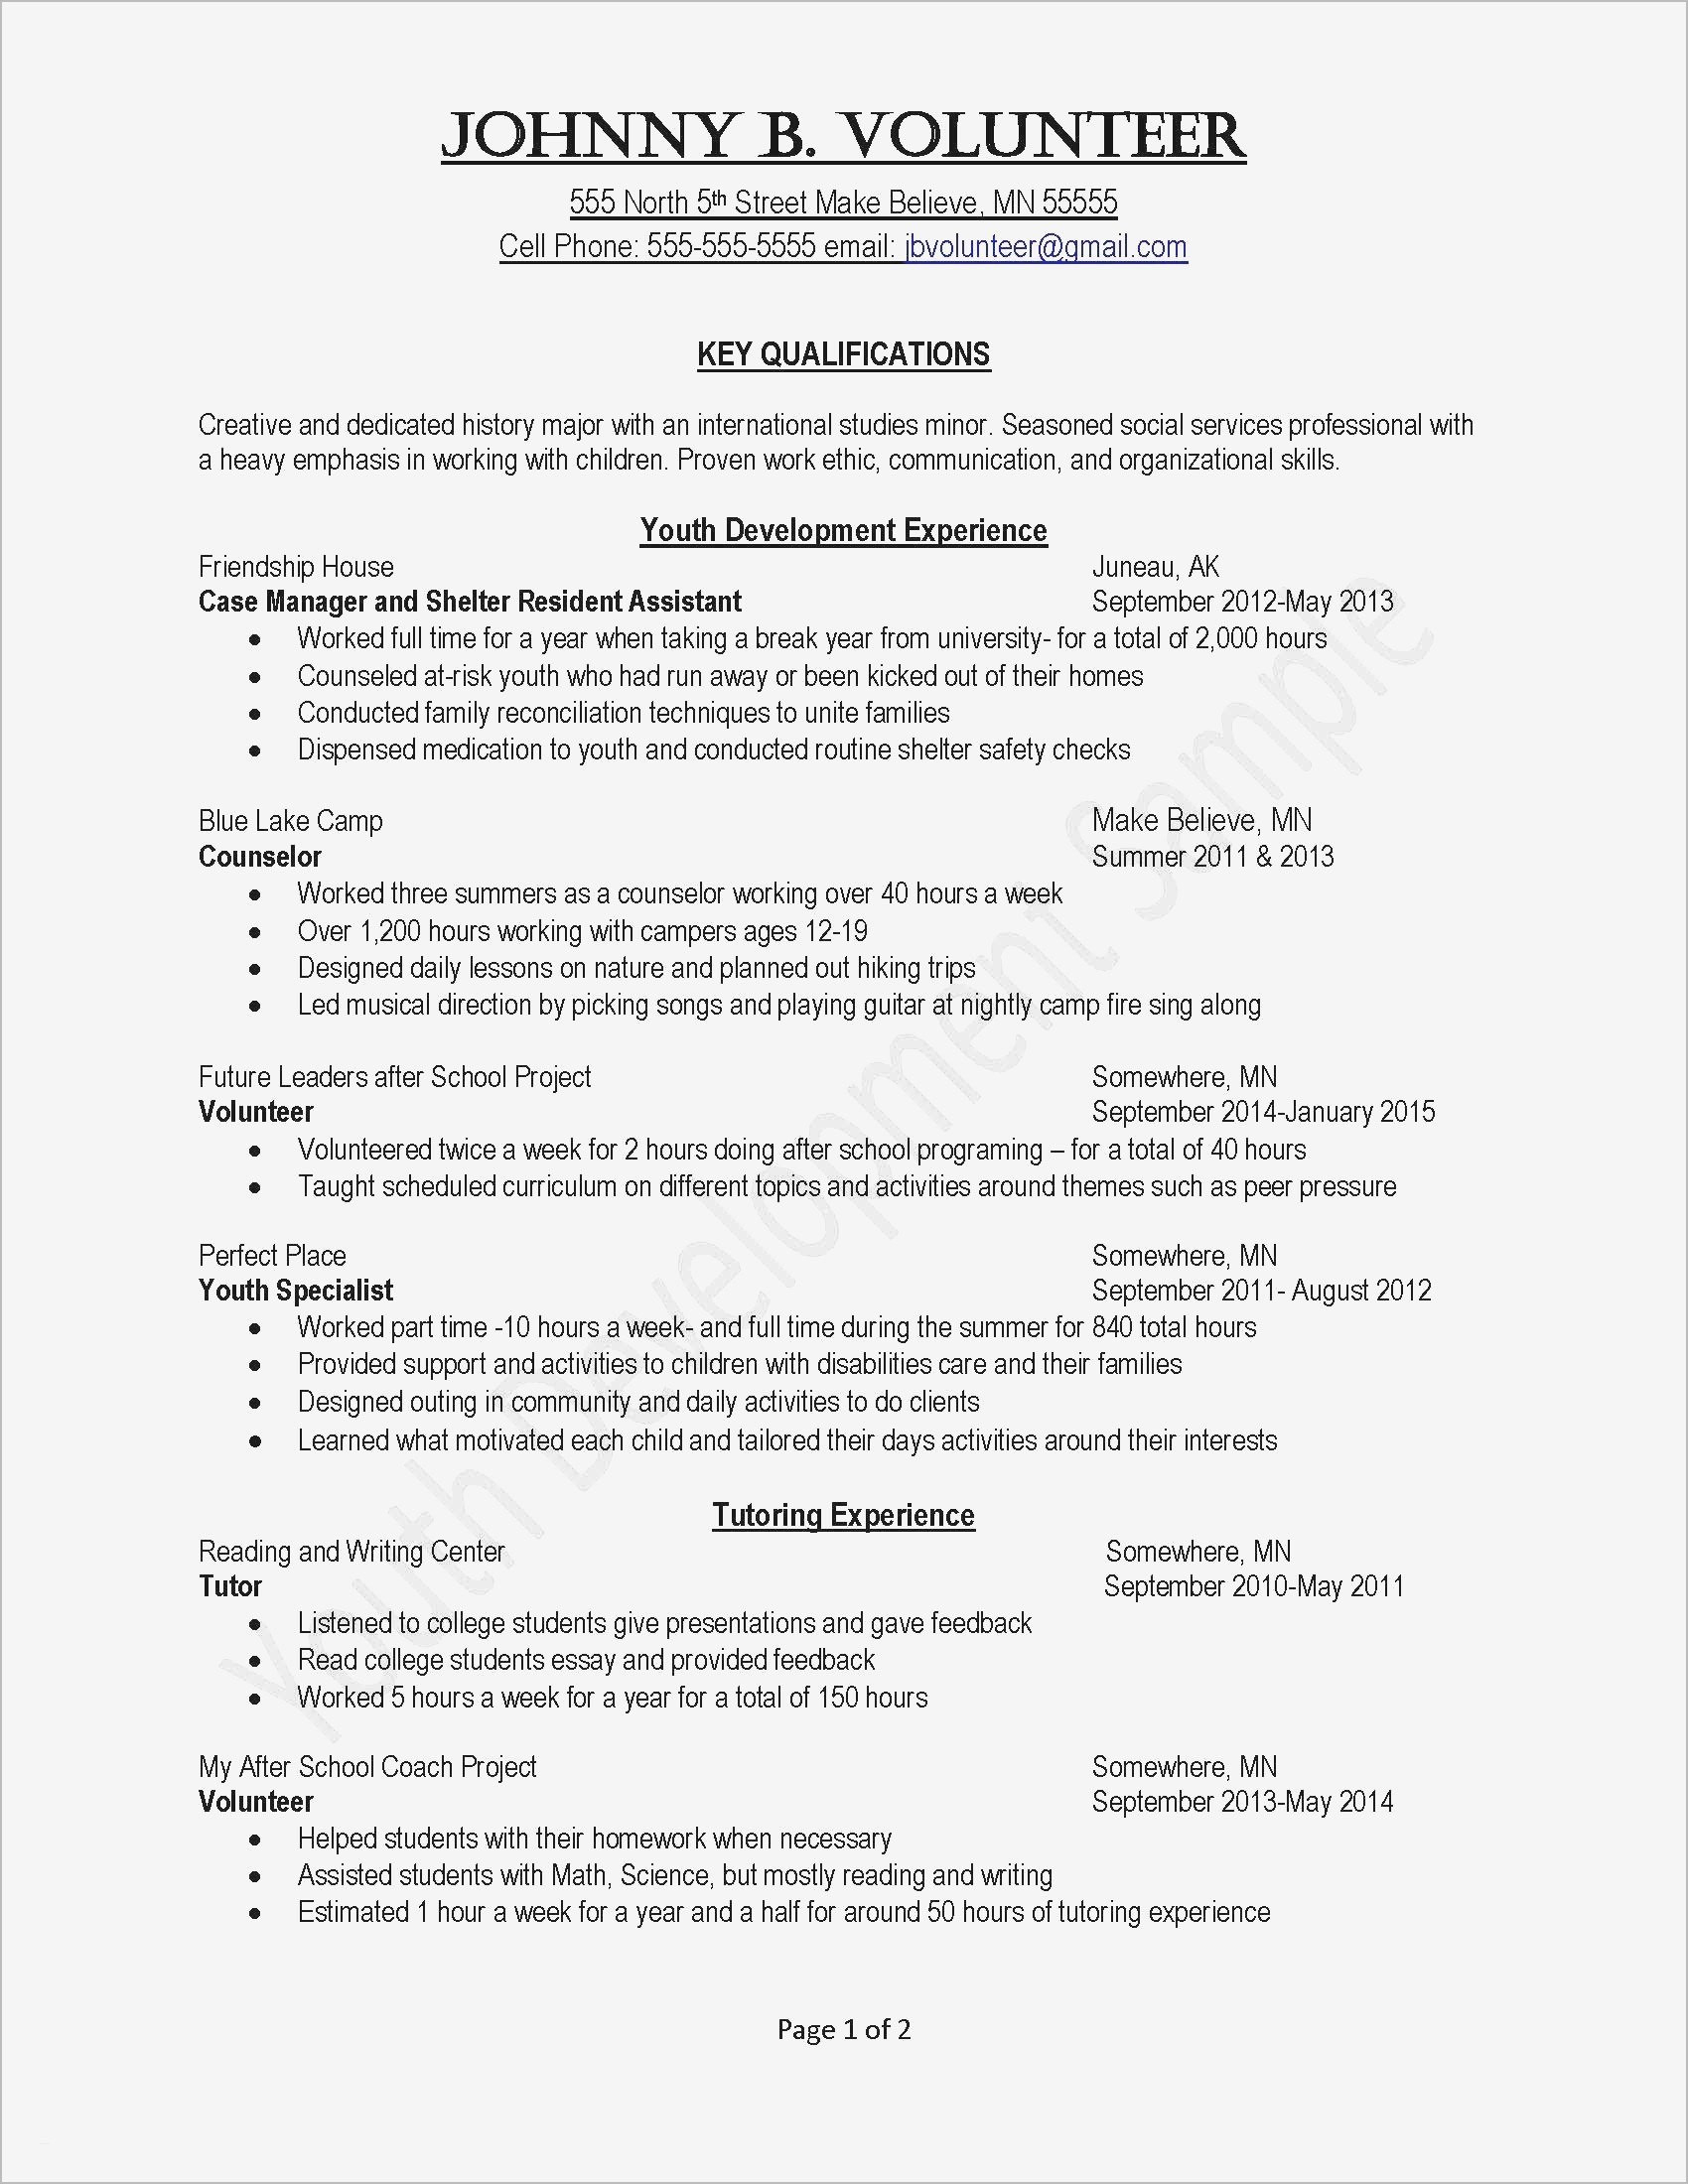 Basic Resume Cover Letter Template - Resume Cover Page Template Free Simple Job Fer Letter Template Us